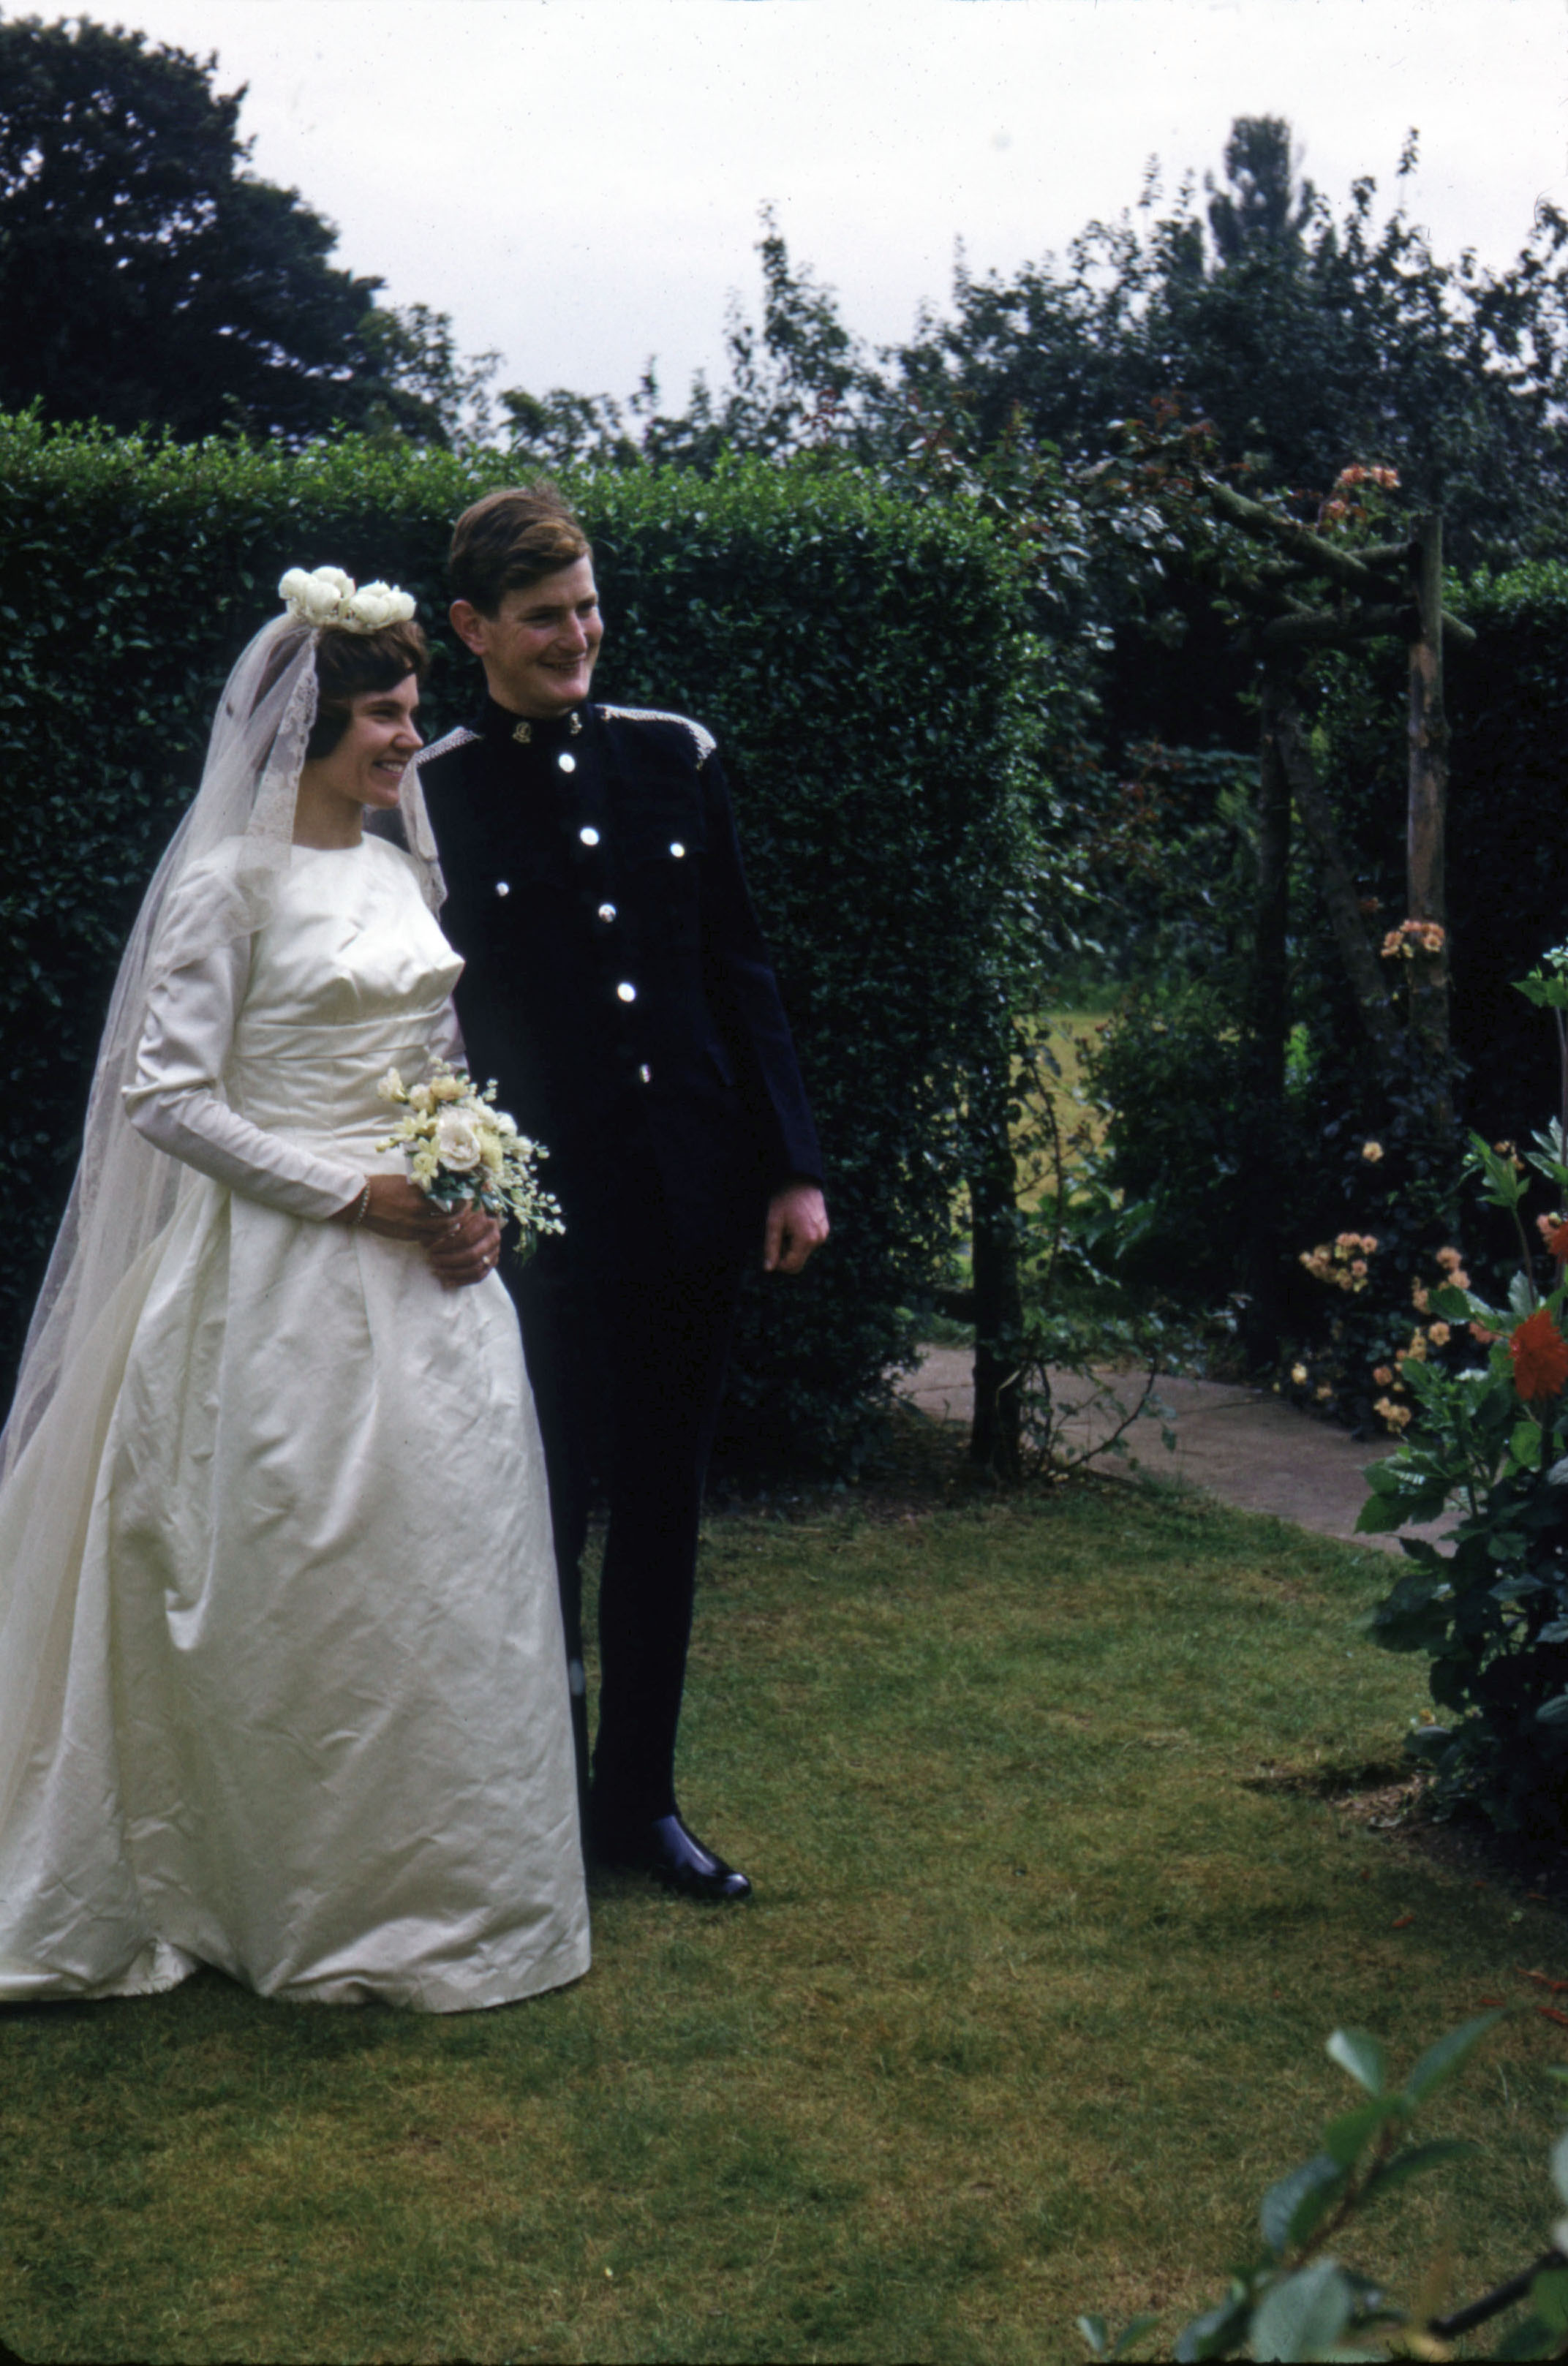 19 Aug 1965 Henry and Ann - man and wife!